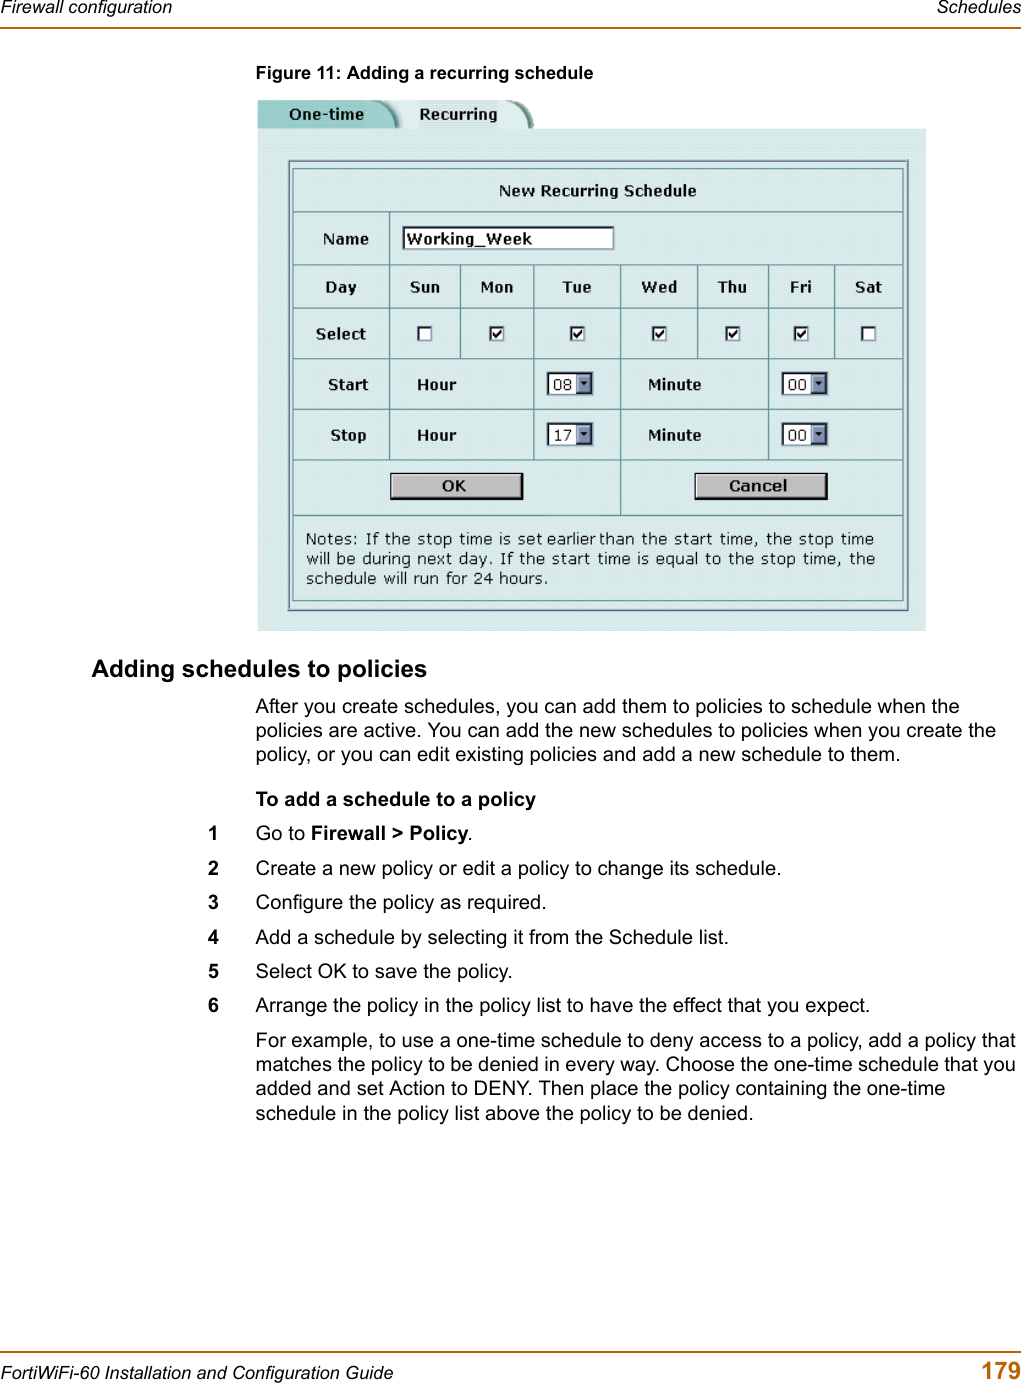 Firewall configuration  SchedulesFortiWiFi-60 Installation and Configuration Guide  179Figure 11: Adding a recurring scheduleAdding schedules to policiesAfter you create schedules, you can add them to policies to schedule when the policies are active. You can add the new schedules to policies when you create the policy, or you can edit existing policies and add a new schedule to them.To add a schedule to a policy1Go to Firewall &gt; Policy.2Create a new policy or edit a policy to change its schedule.3Configure the policy as required.4Add a schedule by selecting it from the Schedule list.5Select OK to save the policy.6Arrange the policy in the policy list to have the effect that you expect.For example, to use a one-time schedule to deny access to a policy, add a policy that matches the policy to be denied in every way. Choose the one-time schedule that you added and set Action to DENY. Then place the policy containing the one-time schedule in the policy list above the policy to be denied.